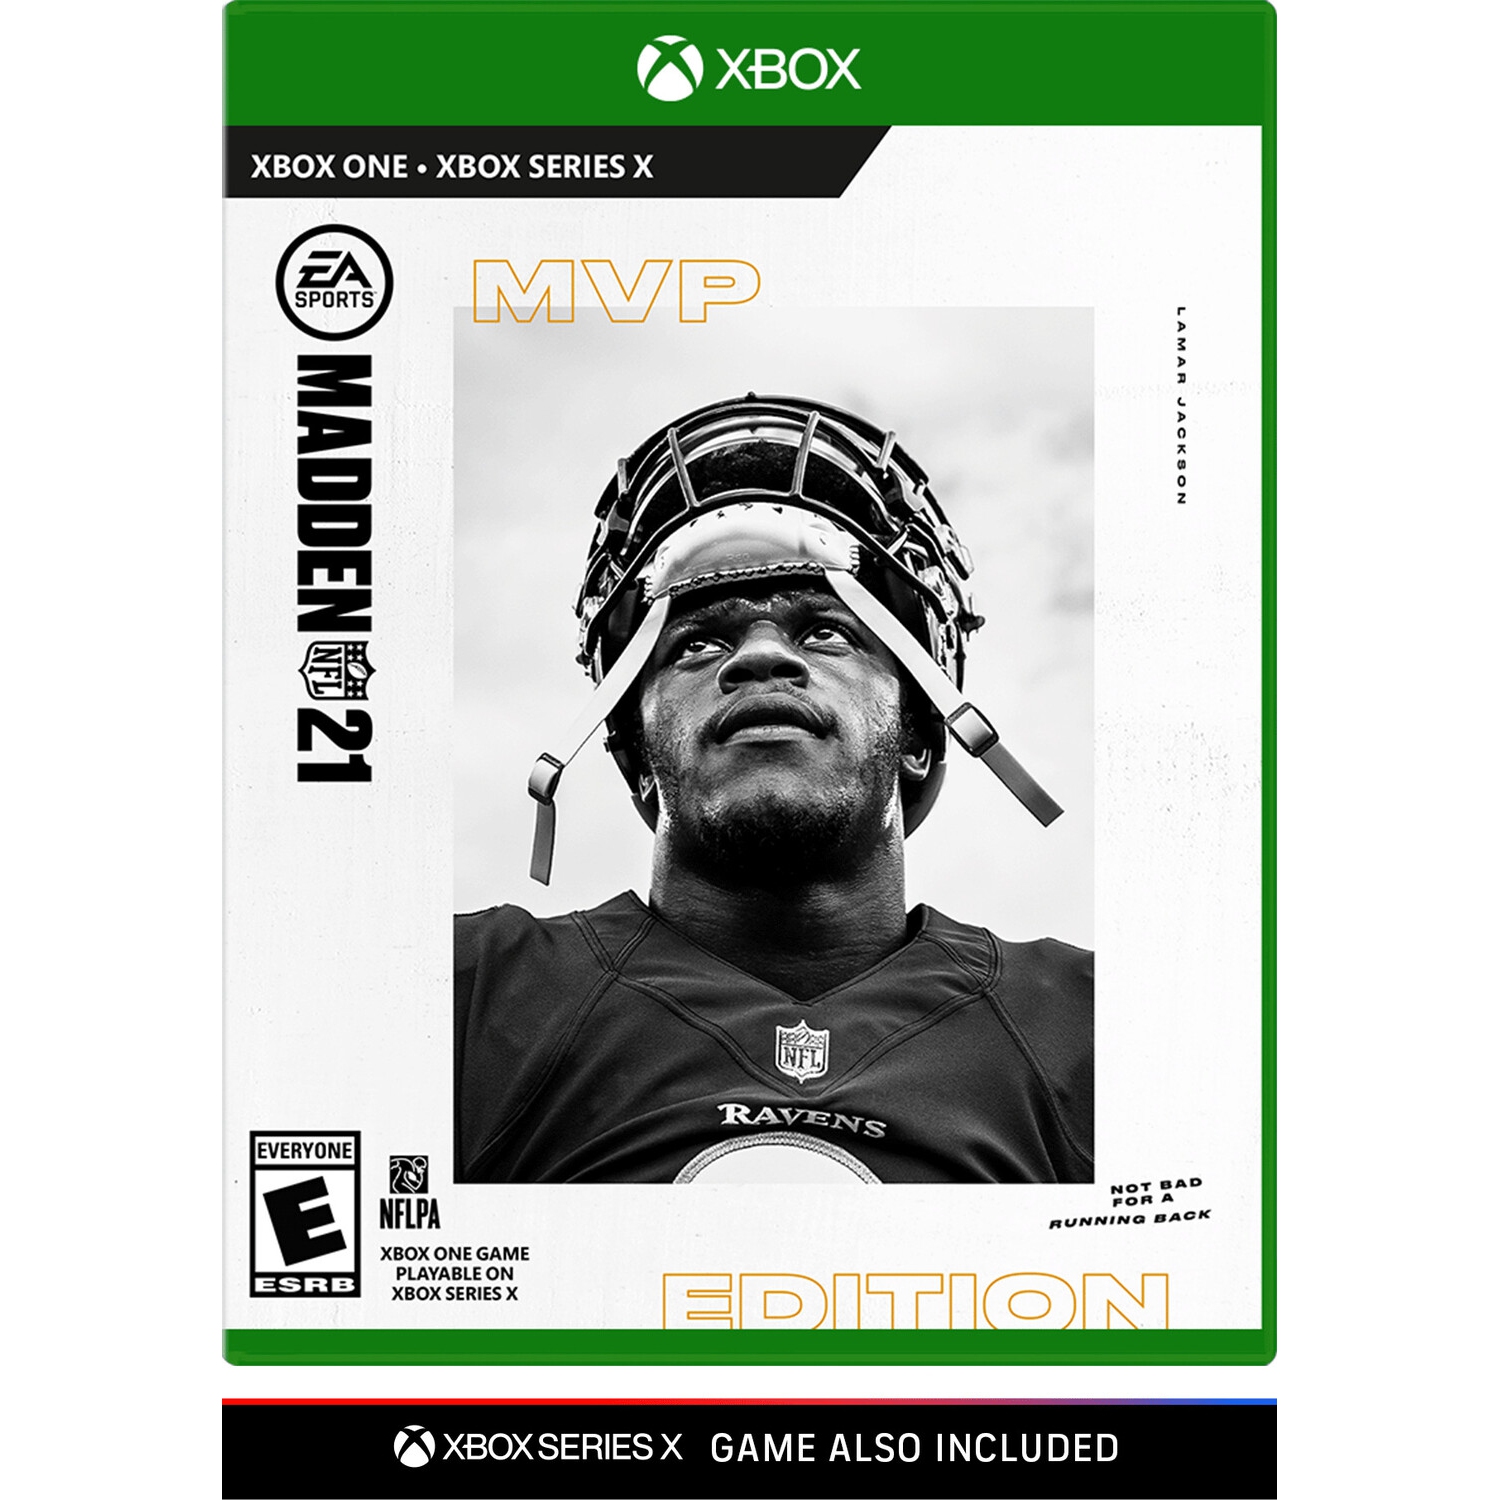 Madden NFL 21 - MVP Edition for Xbox One [VIDEOGAMES] Xbox One